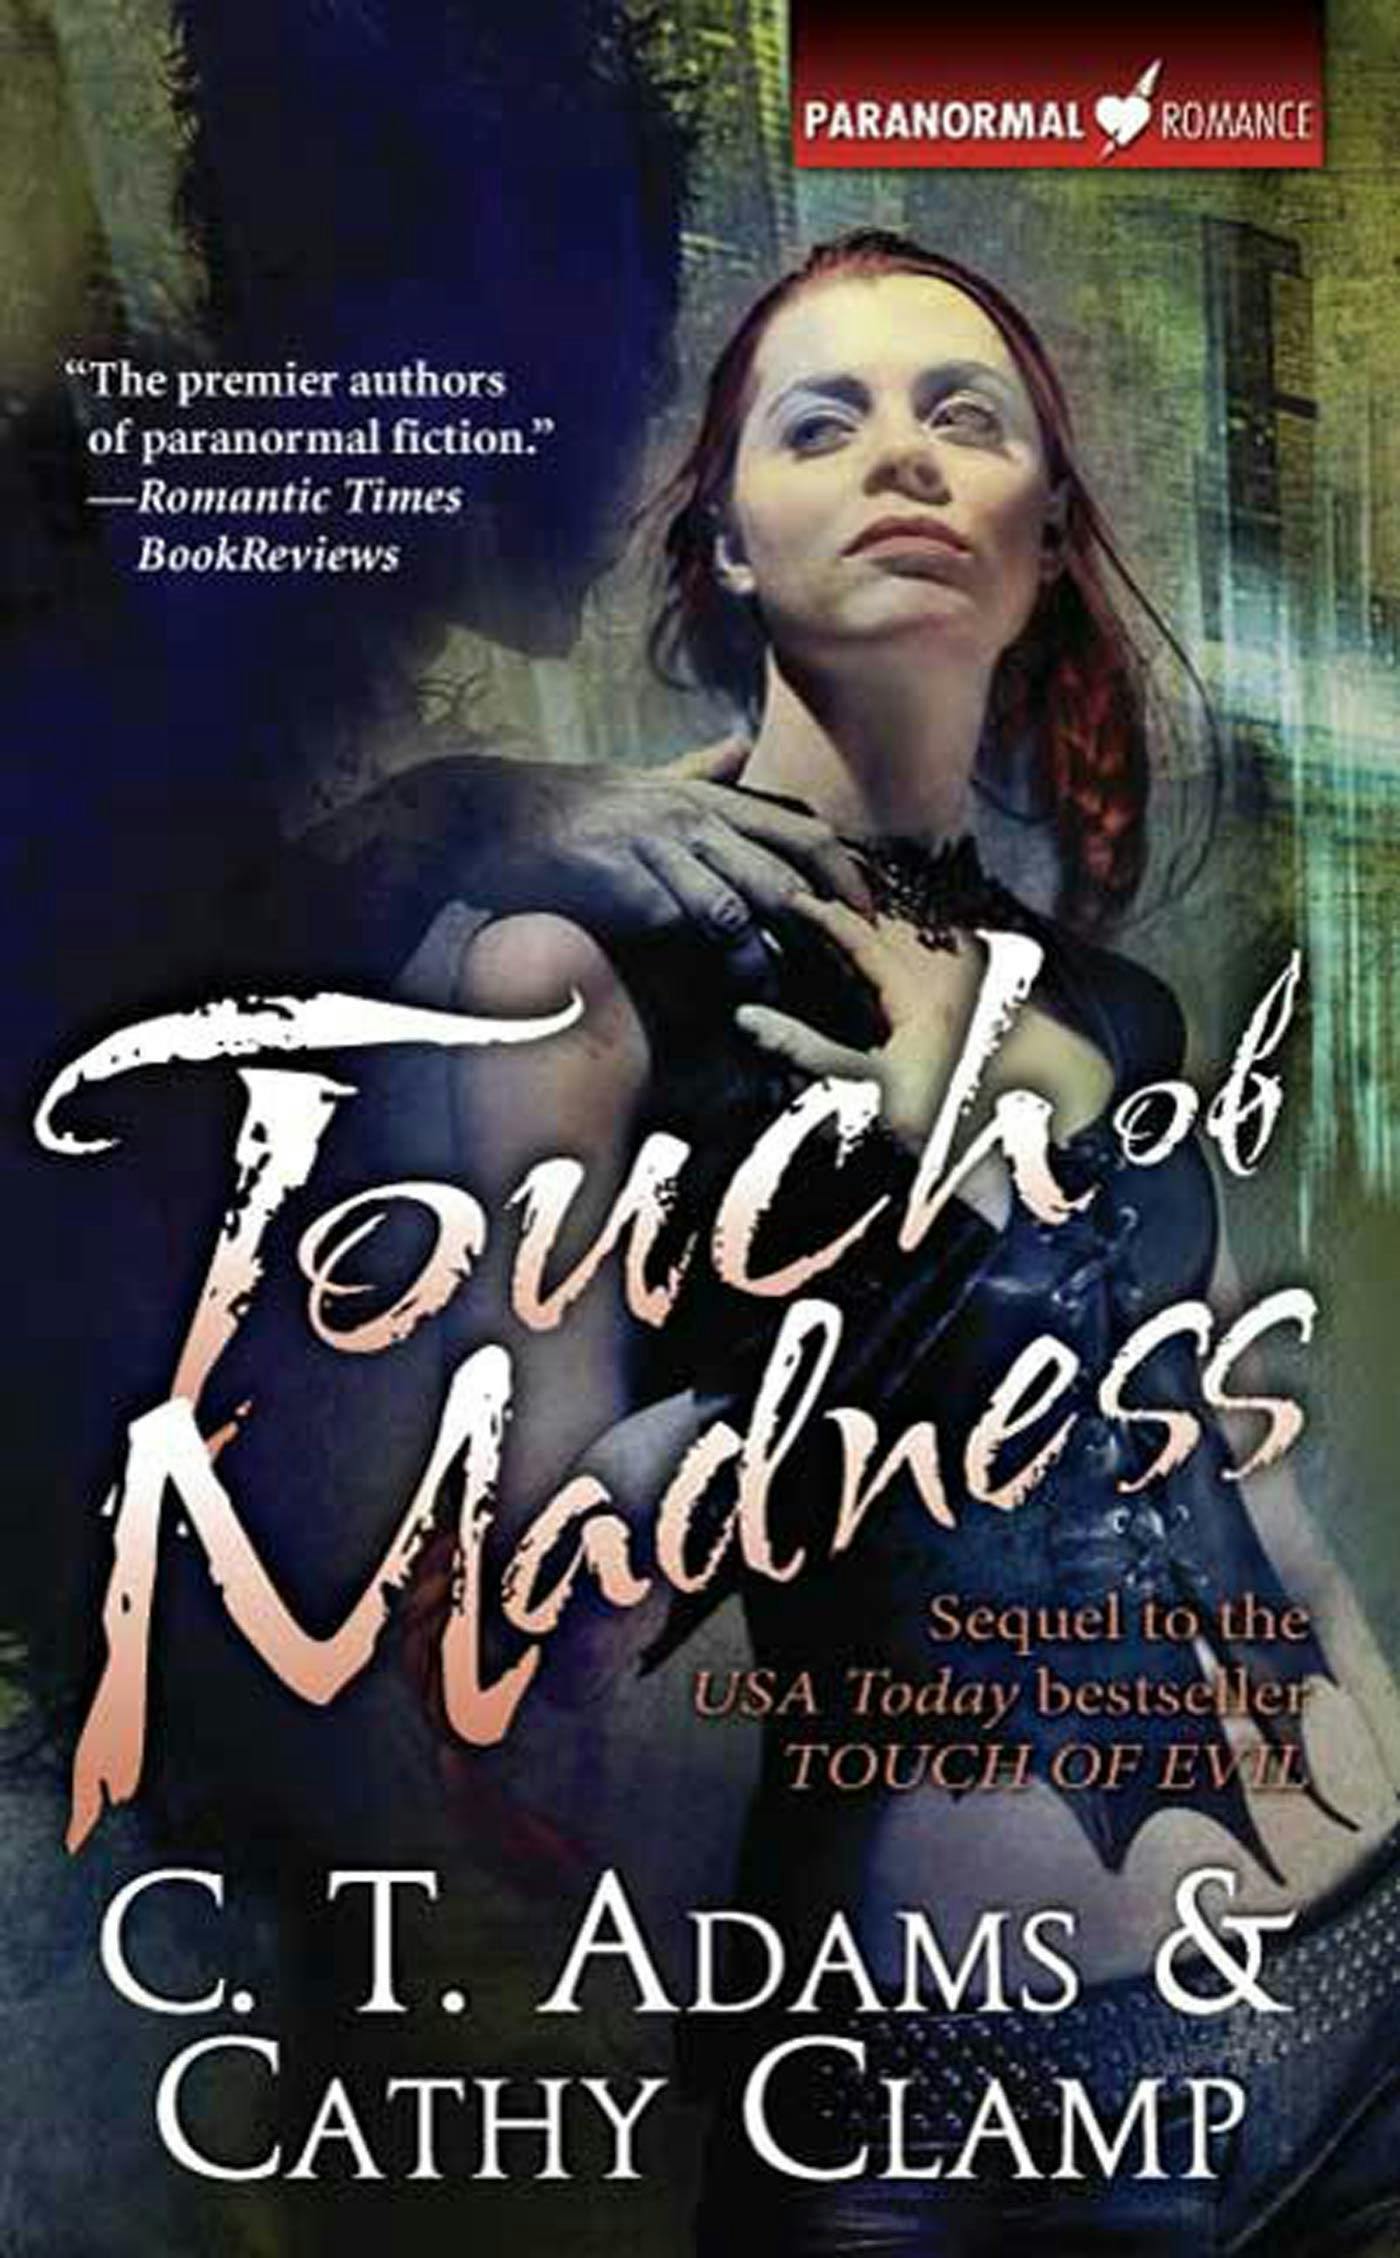 Touch of Madness